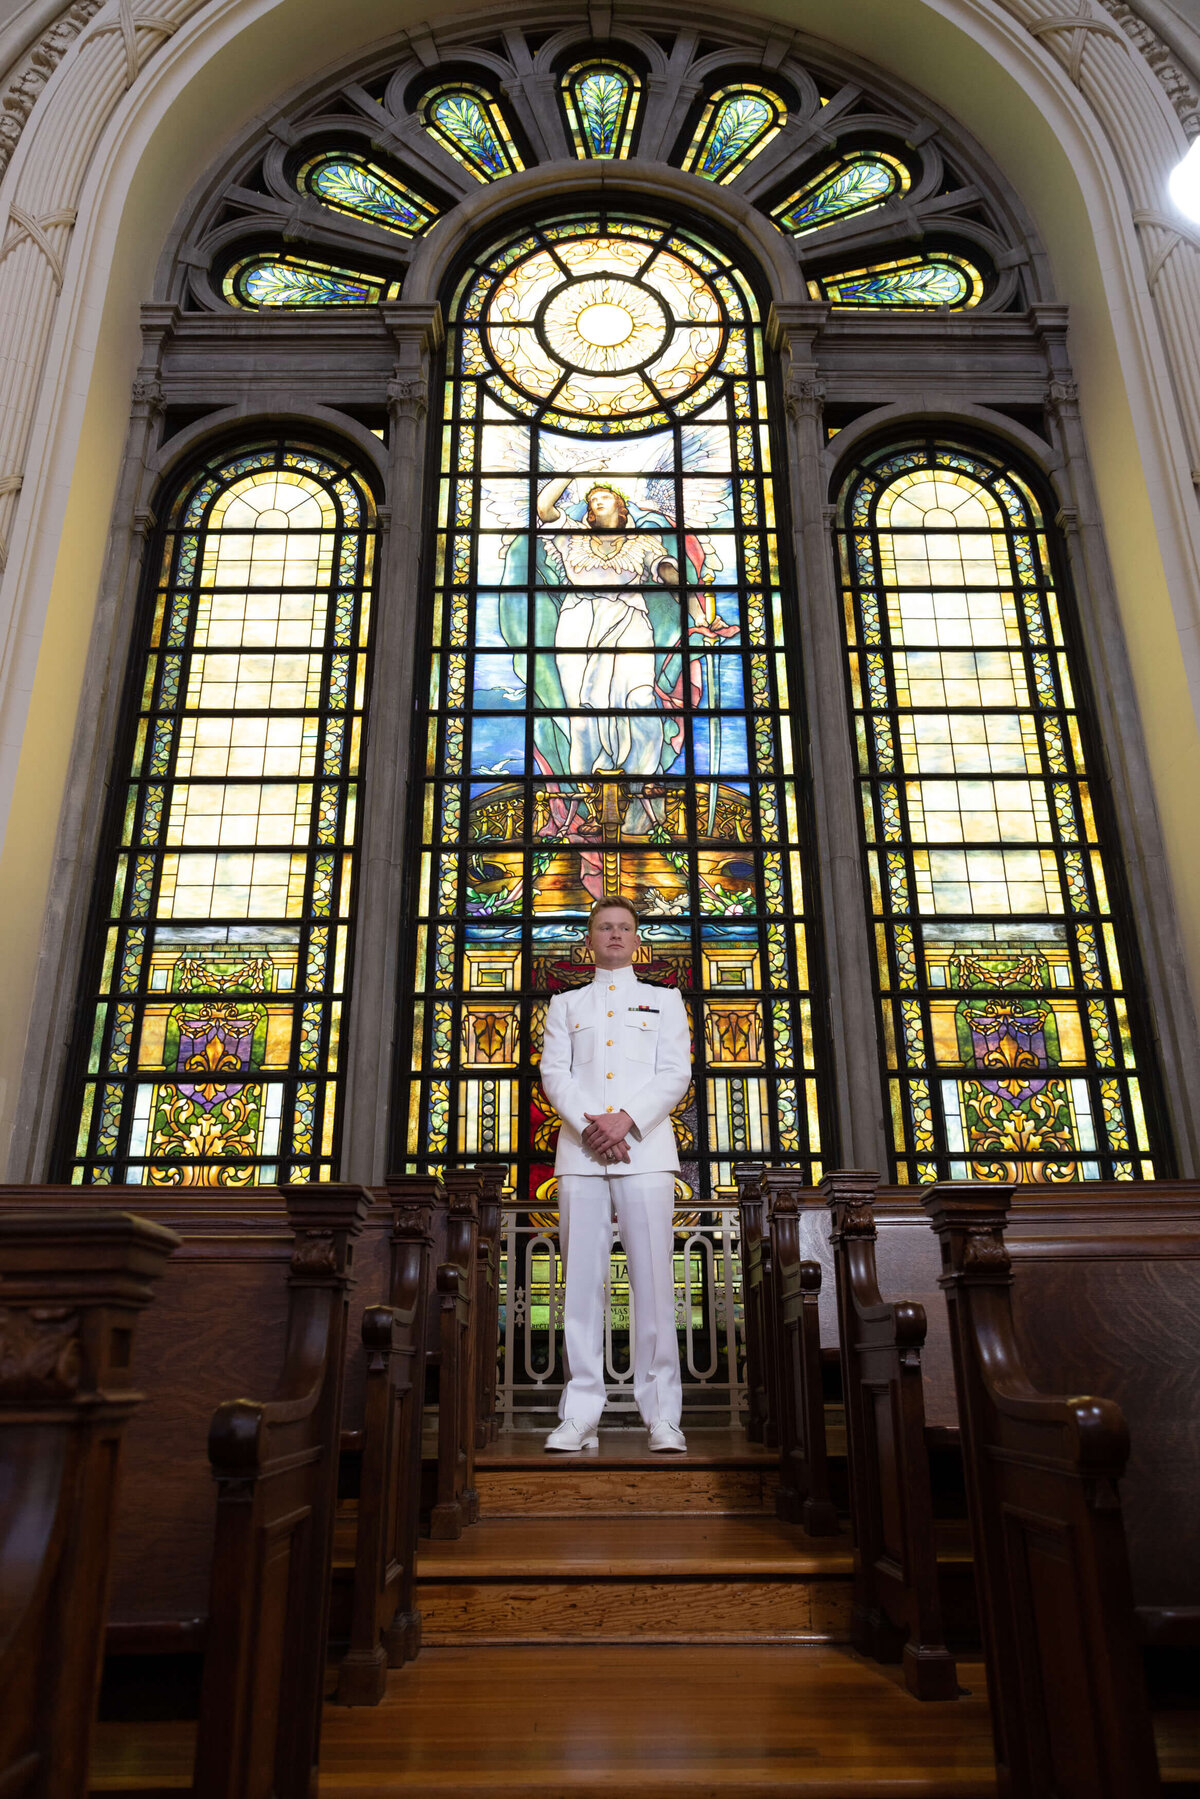 USNA Midshipman senior portrait with stained glass at the Naval Academy Chapel in Annapolis Maryland.